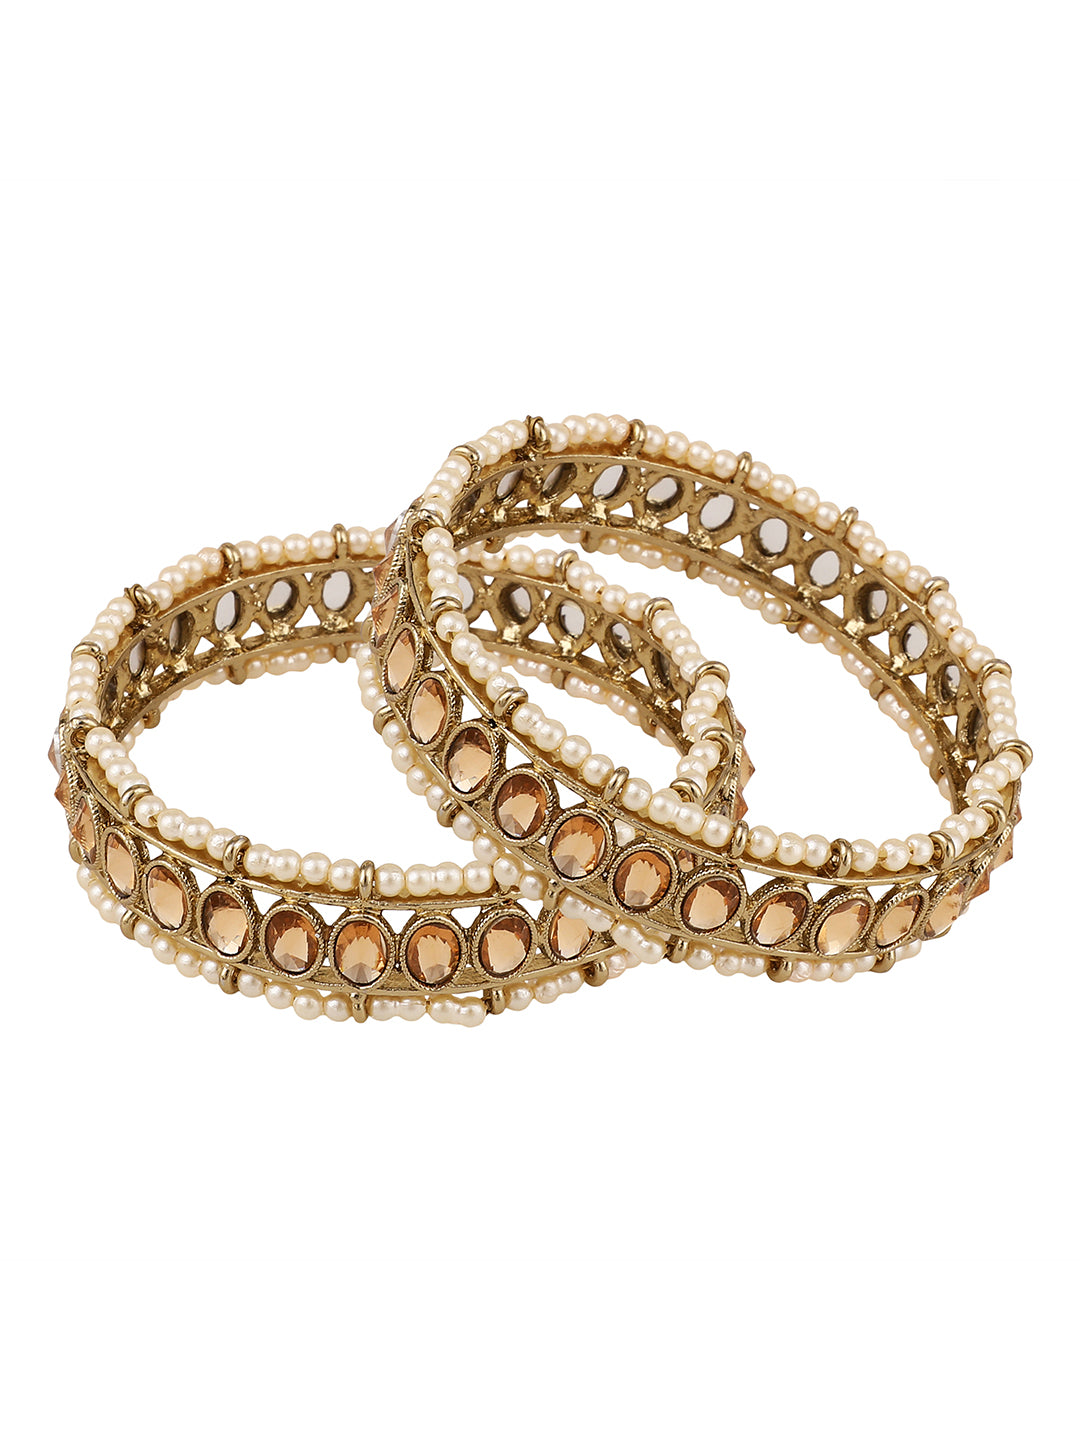 Women's/Girls Ethnic Antiique Gold Plated Kundan And Pearl Studded Bangle Set Of 2. - Mode Mania